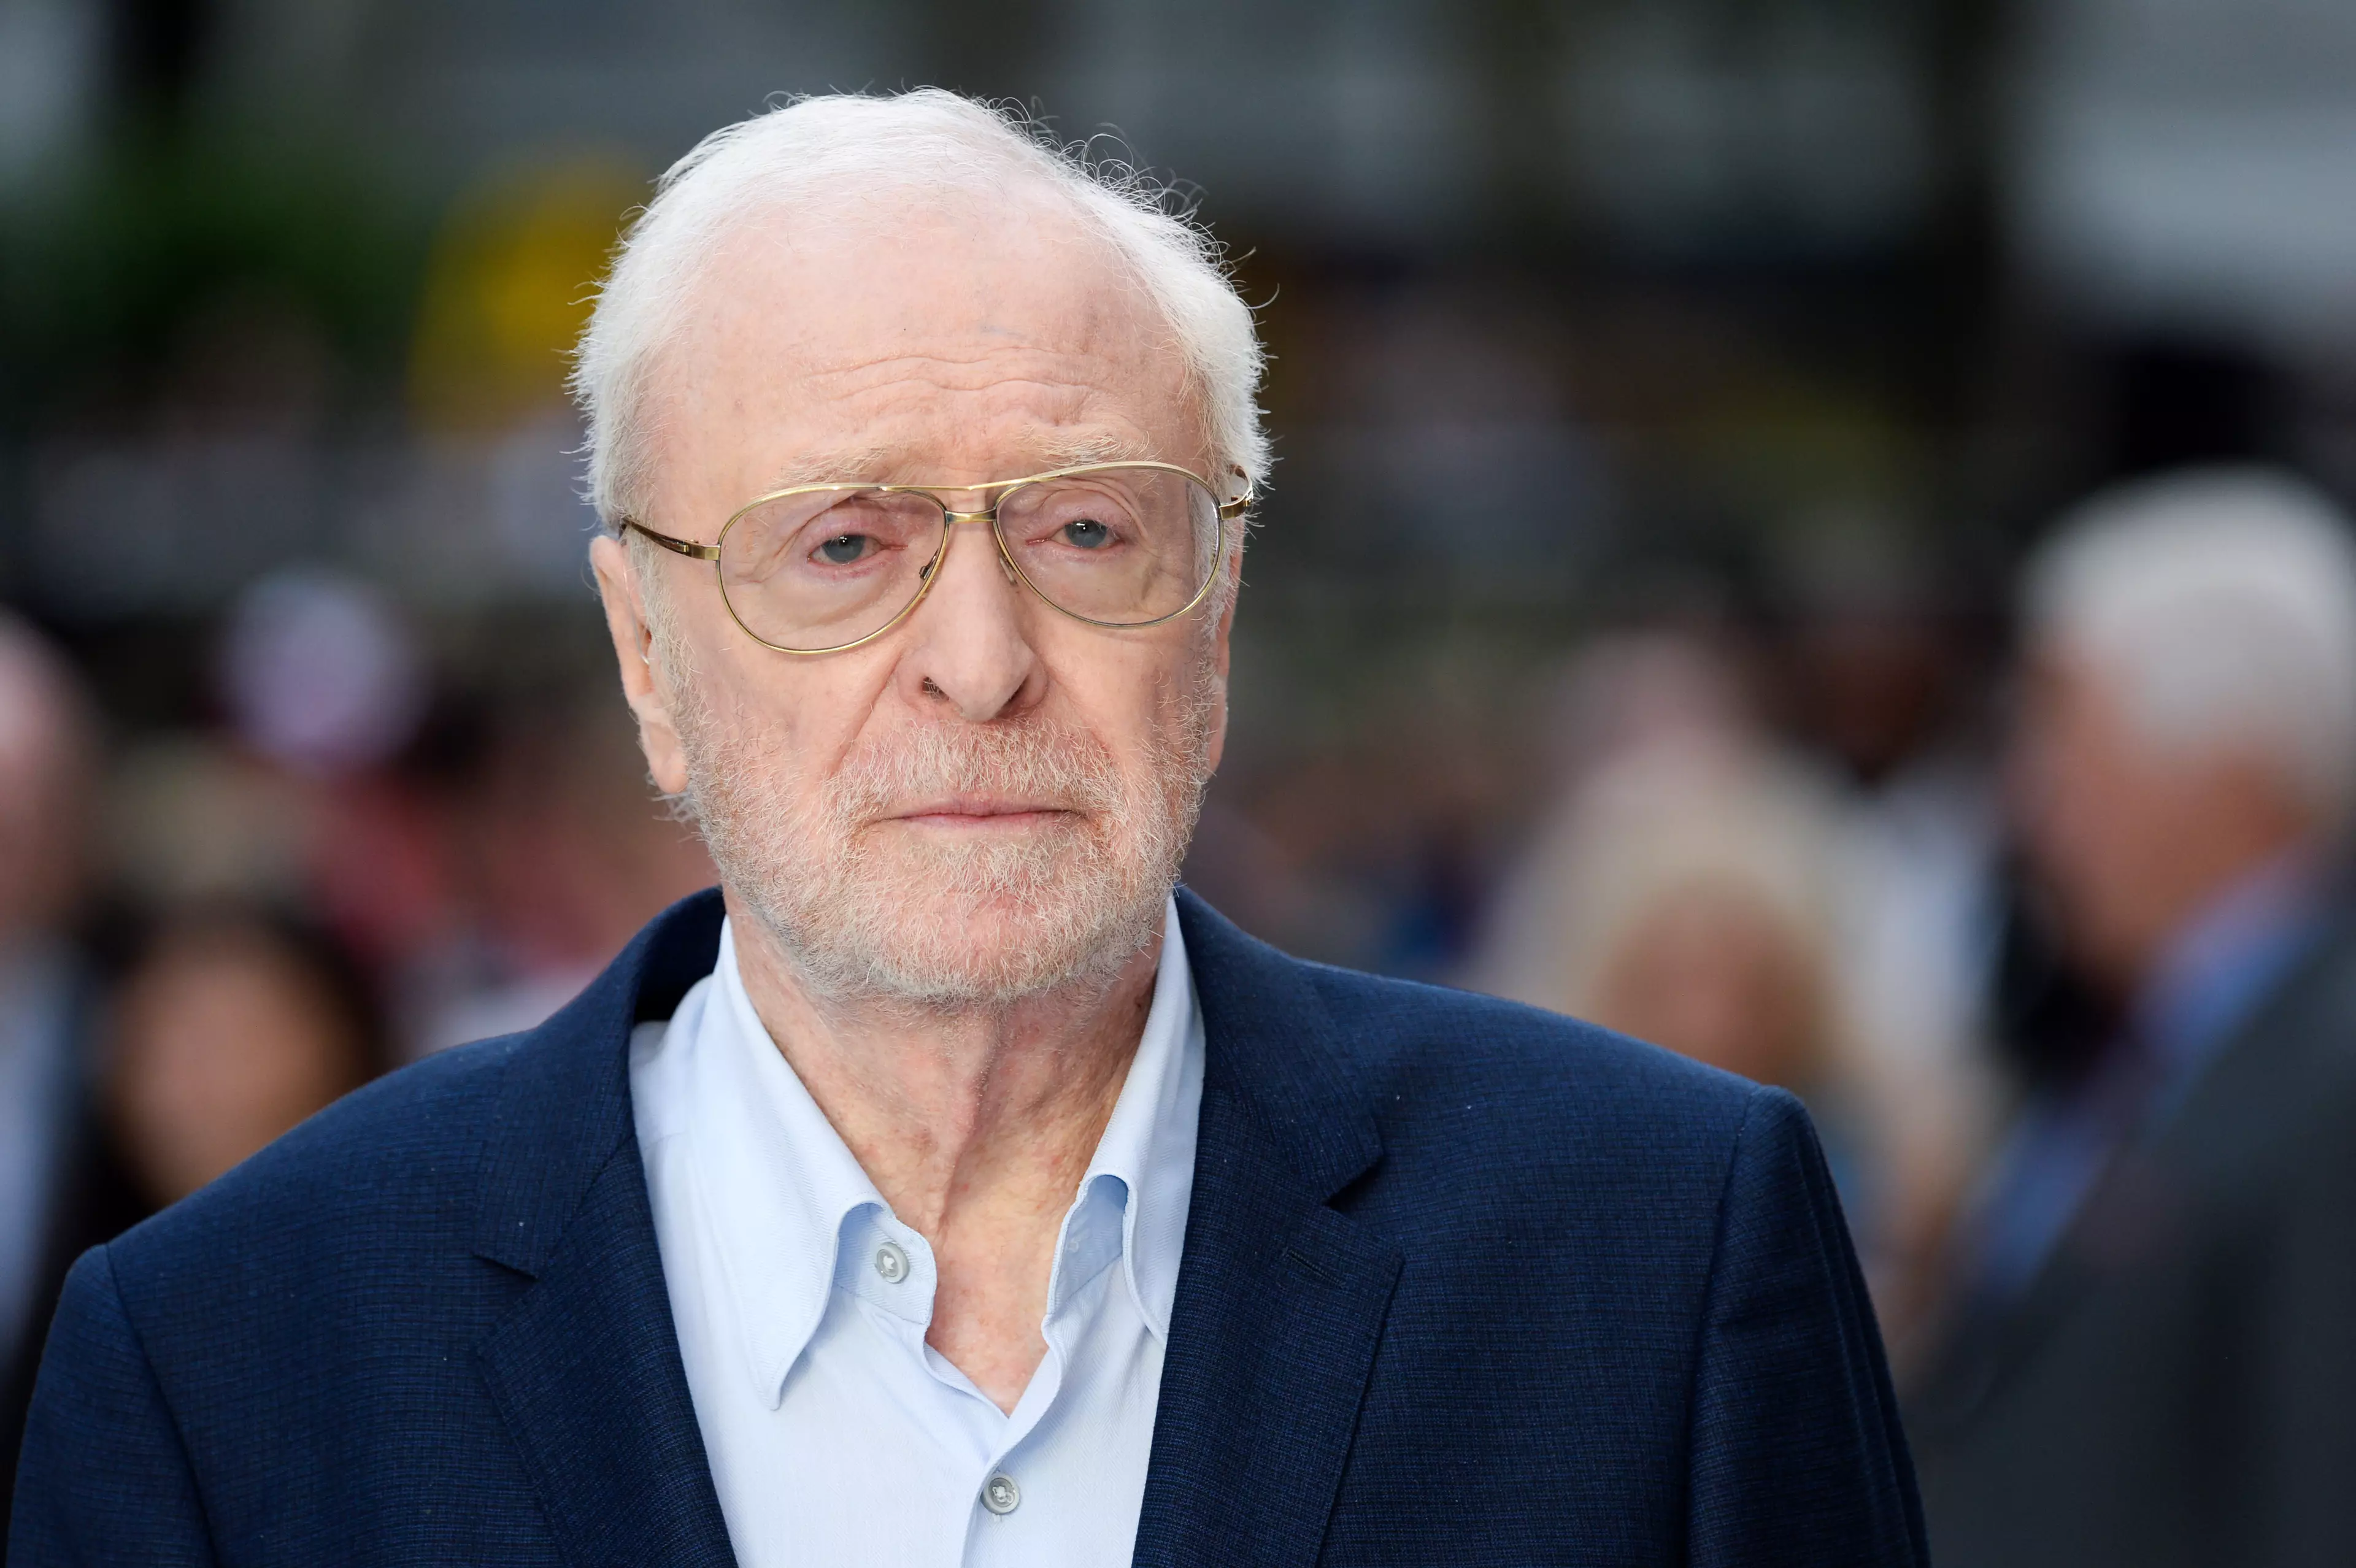 Michael Caine will star in Tenet.